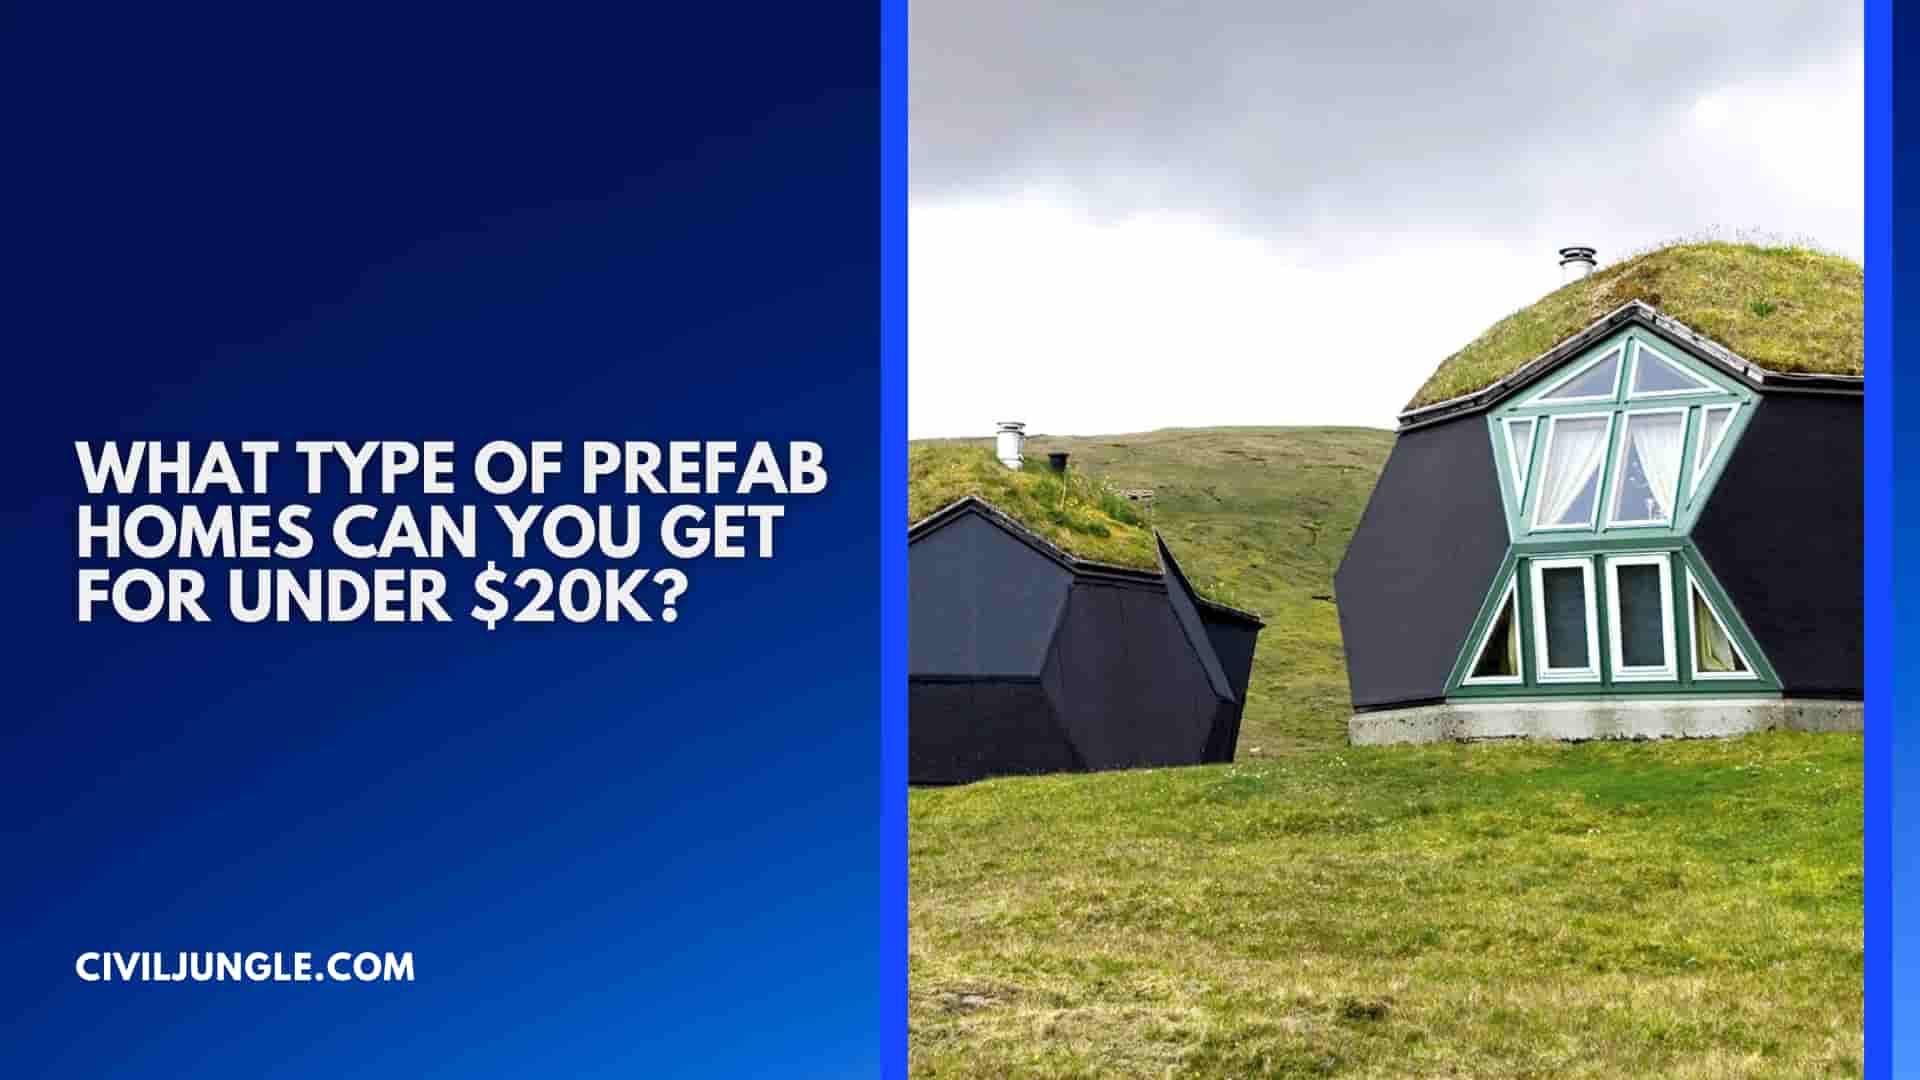 What Type of Prefab Homes Can You Get for Under $20k?